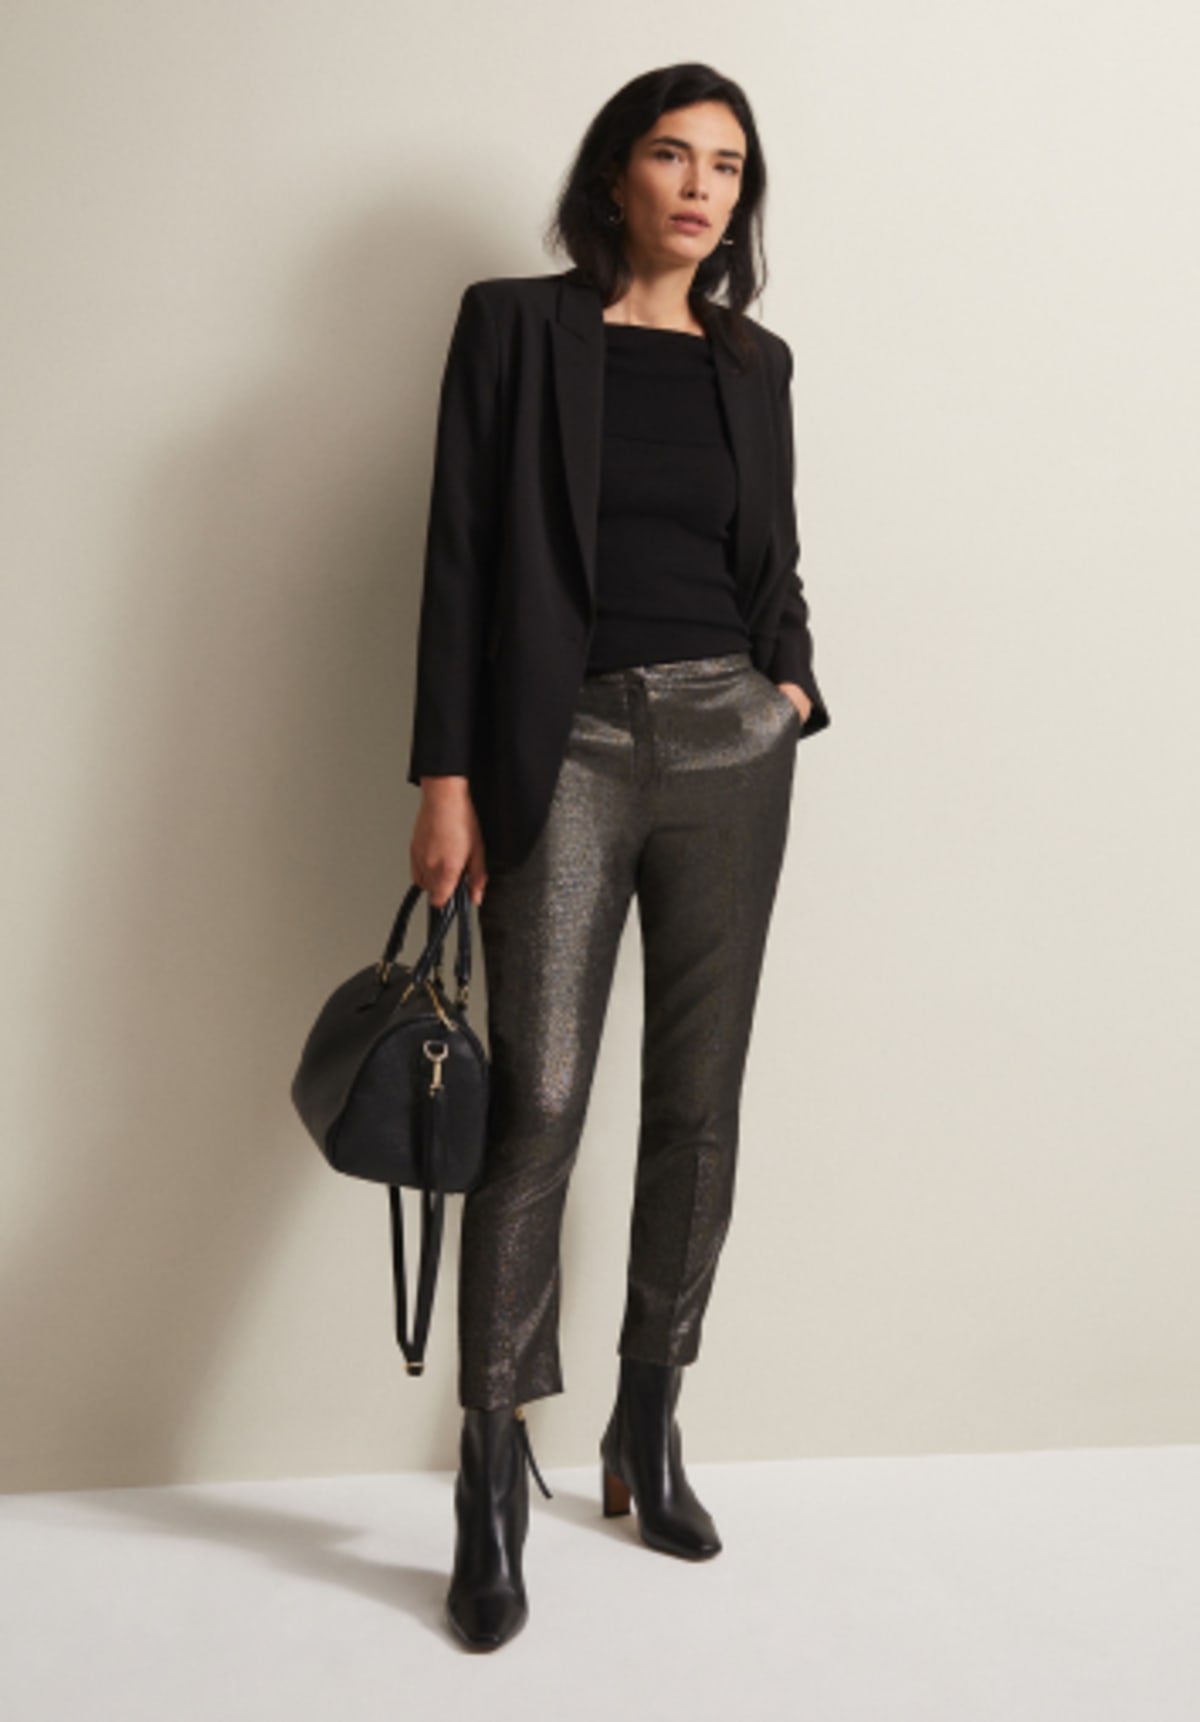 Woman in Phase Eight black blazer and metallic trousers